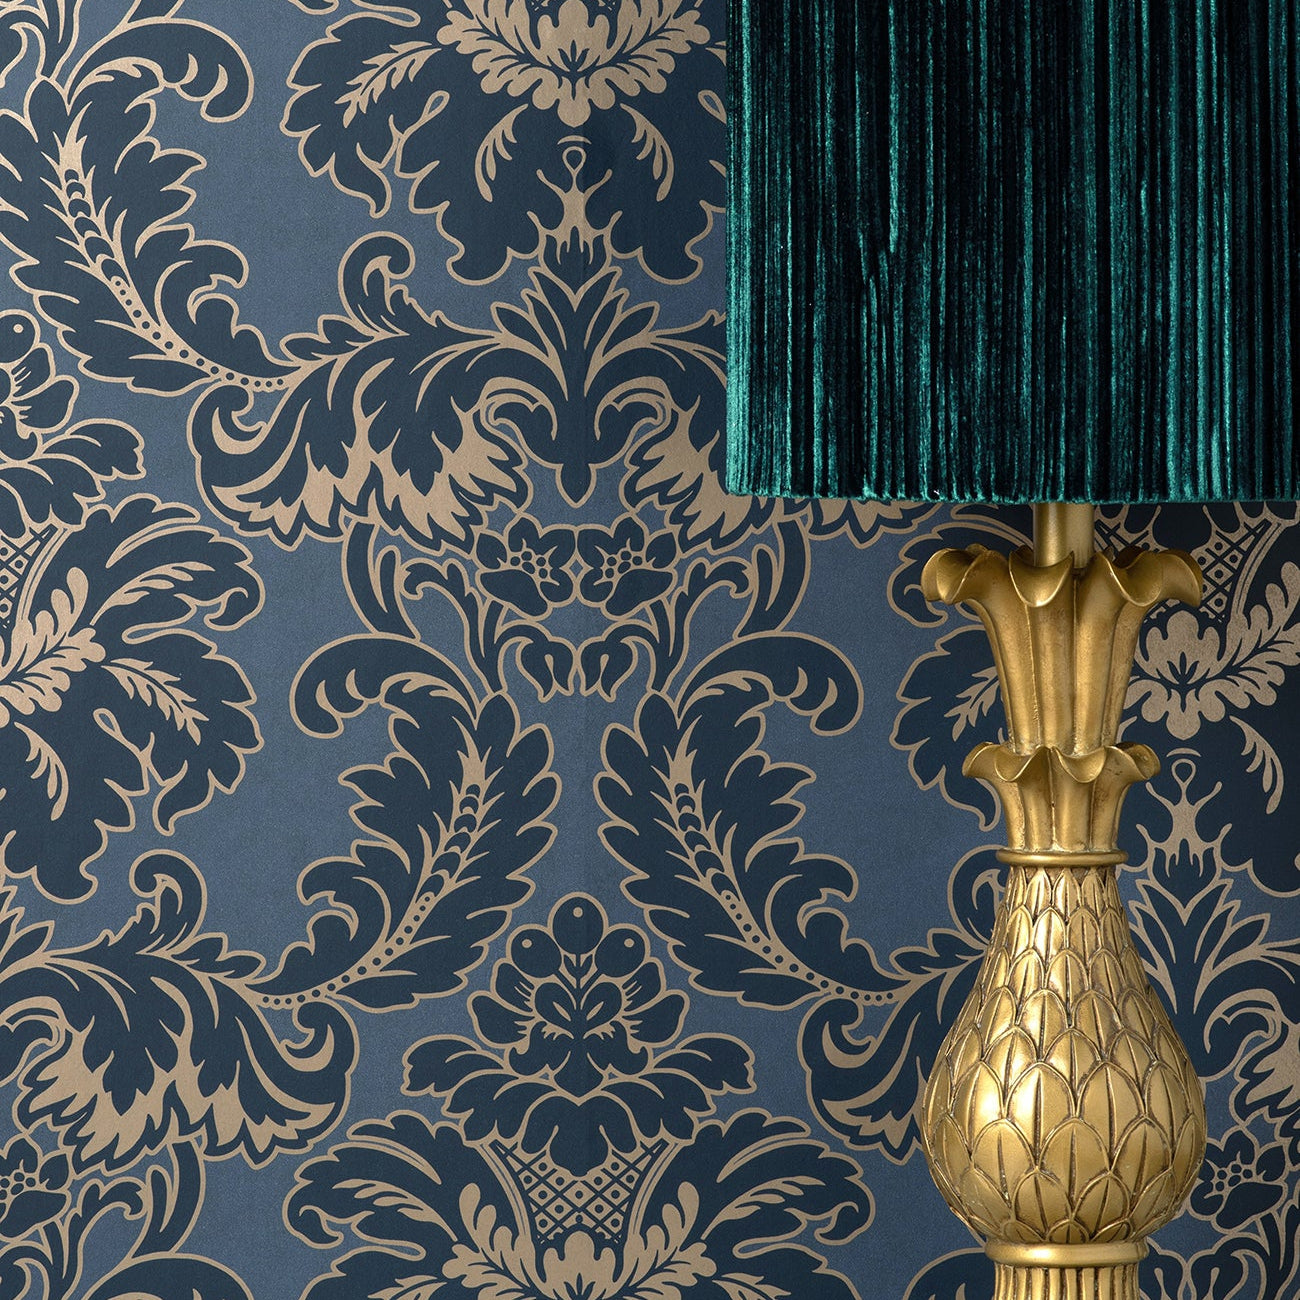 Abstract damask design classic wallpaper patterns - TenStickers